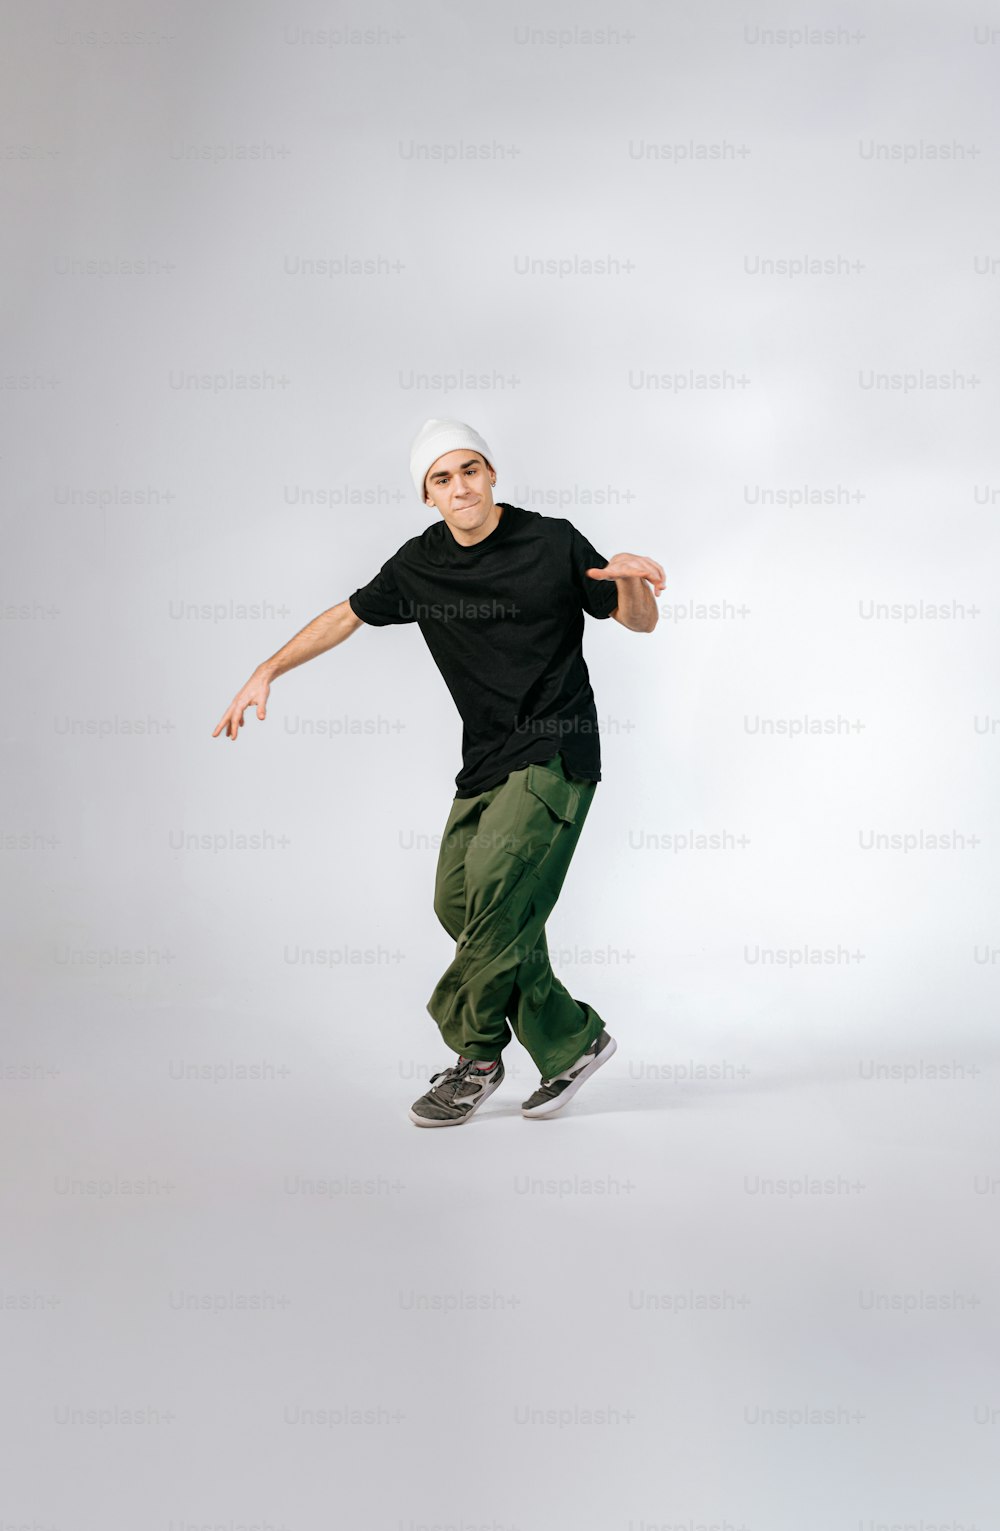 a man in black shirt and green pants doing a trick